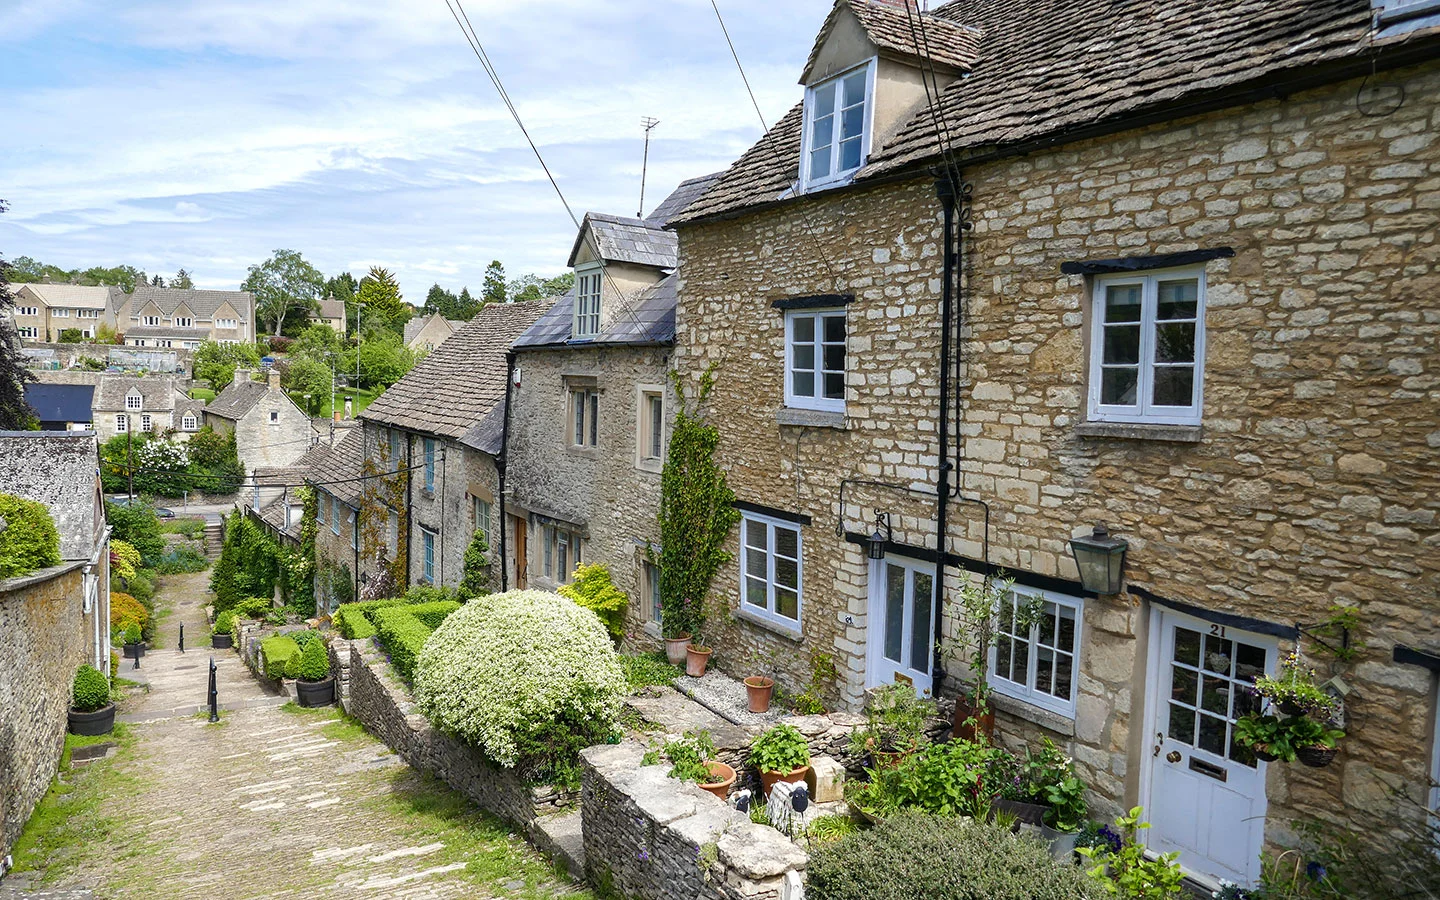 The Chipping Steps, Tetbury, on a day trip from Bath to Cotswolds